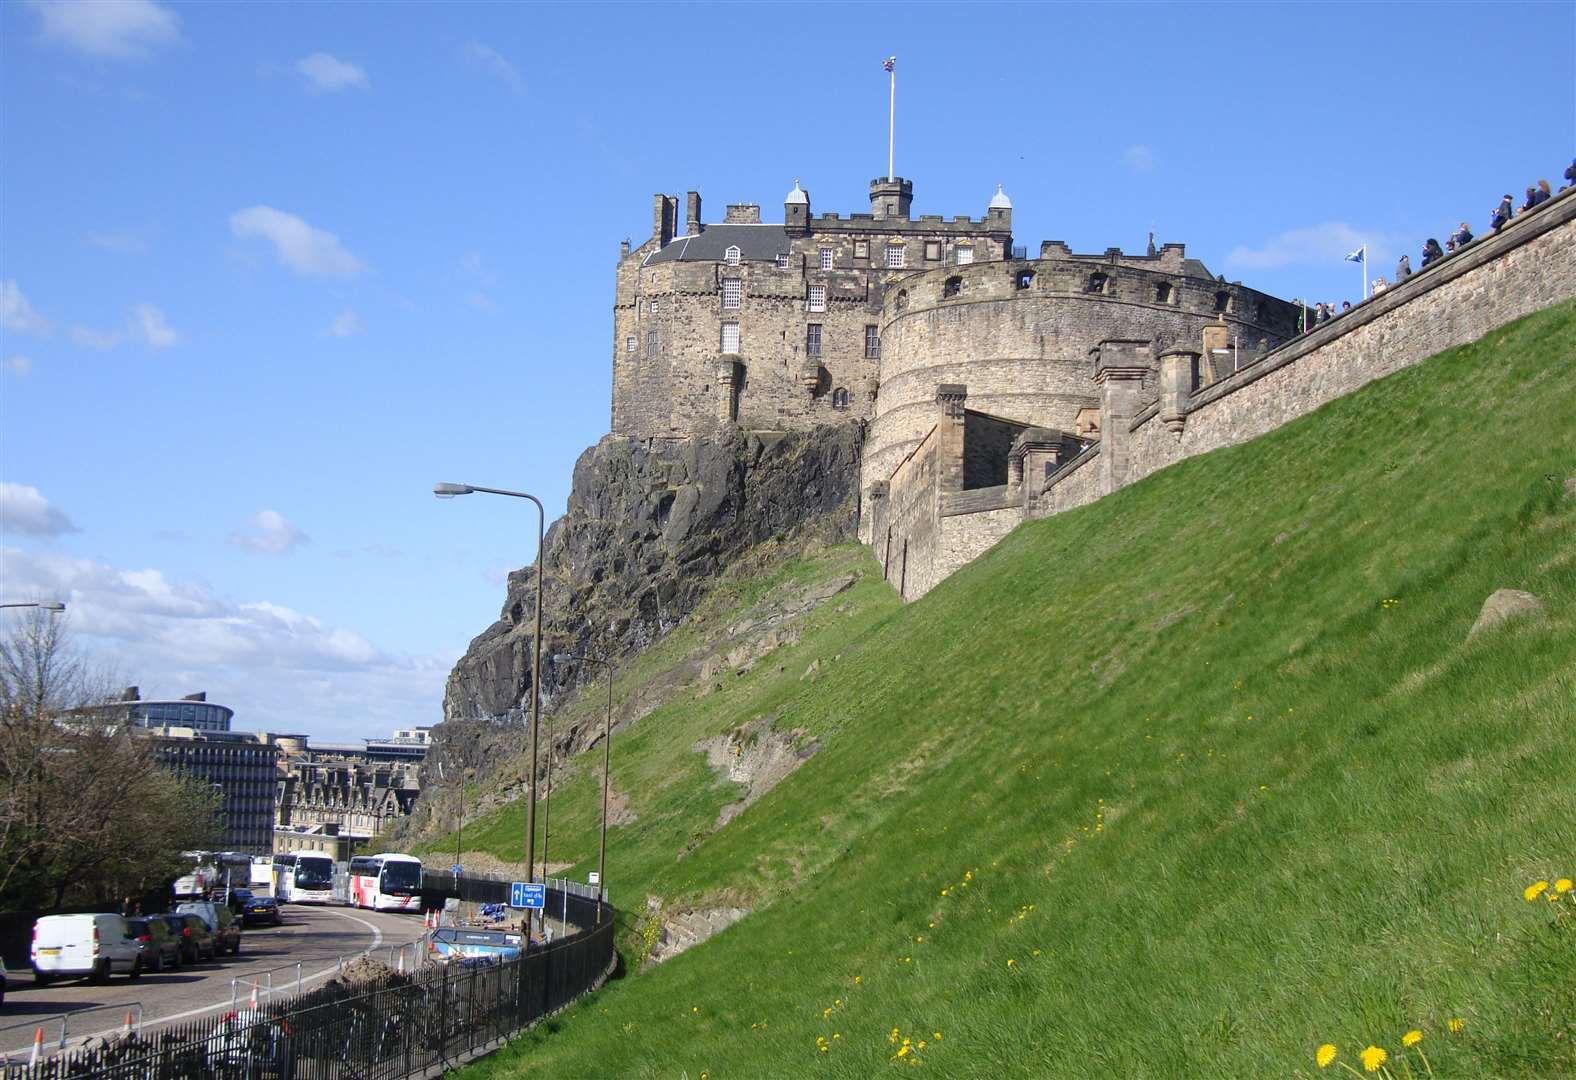 Edinburgh Castle is now home to the Stone of Destiny after it was handed back to the Scots in 1996